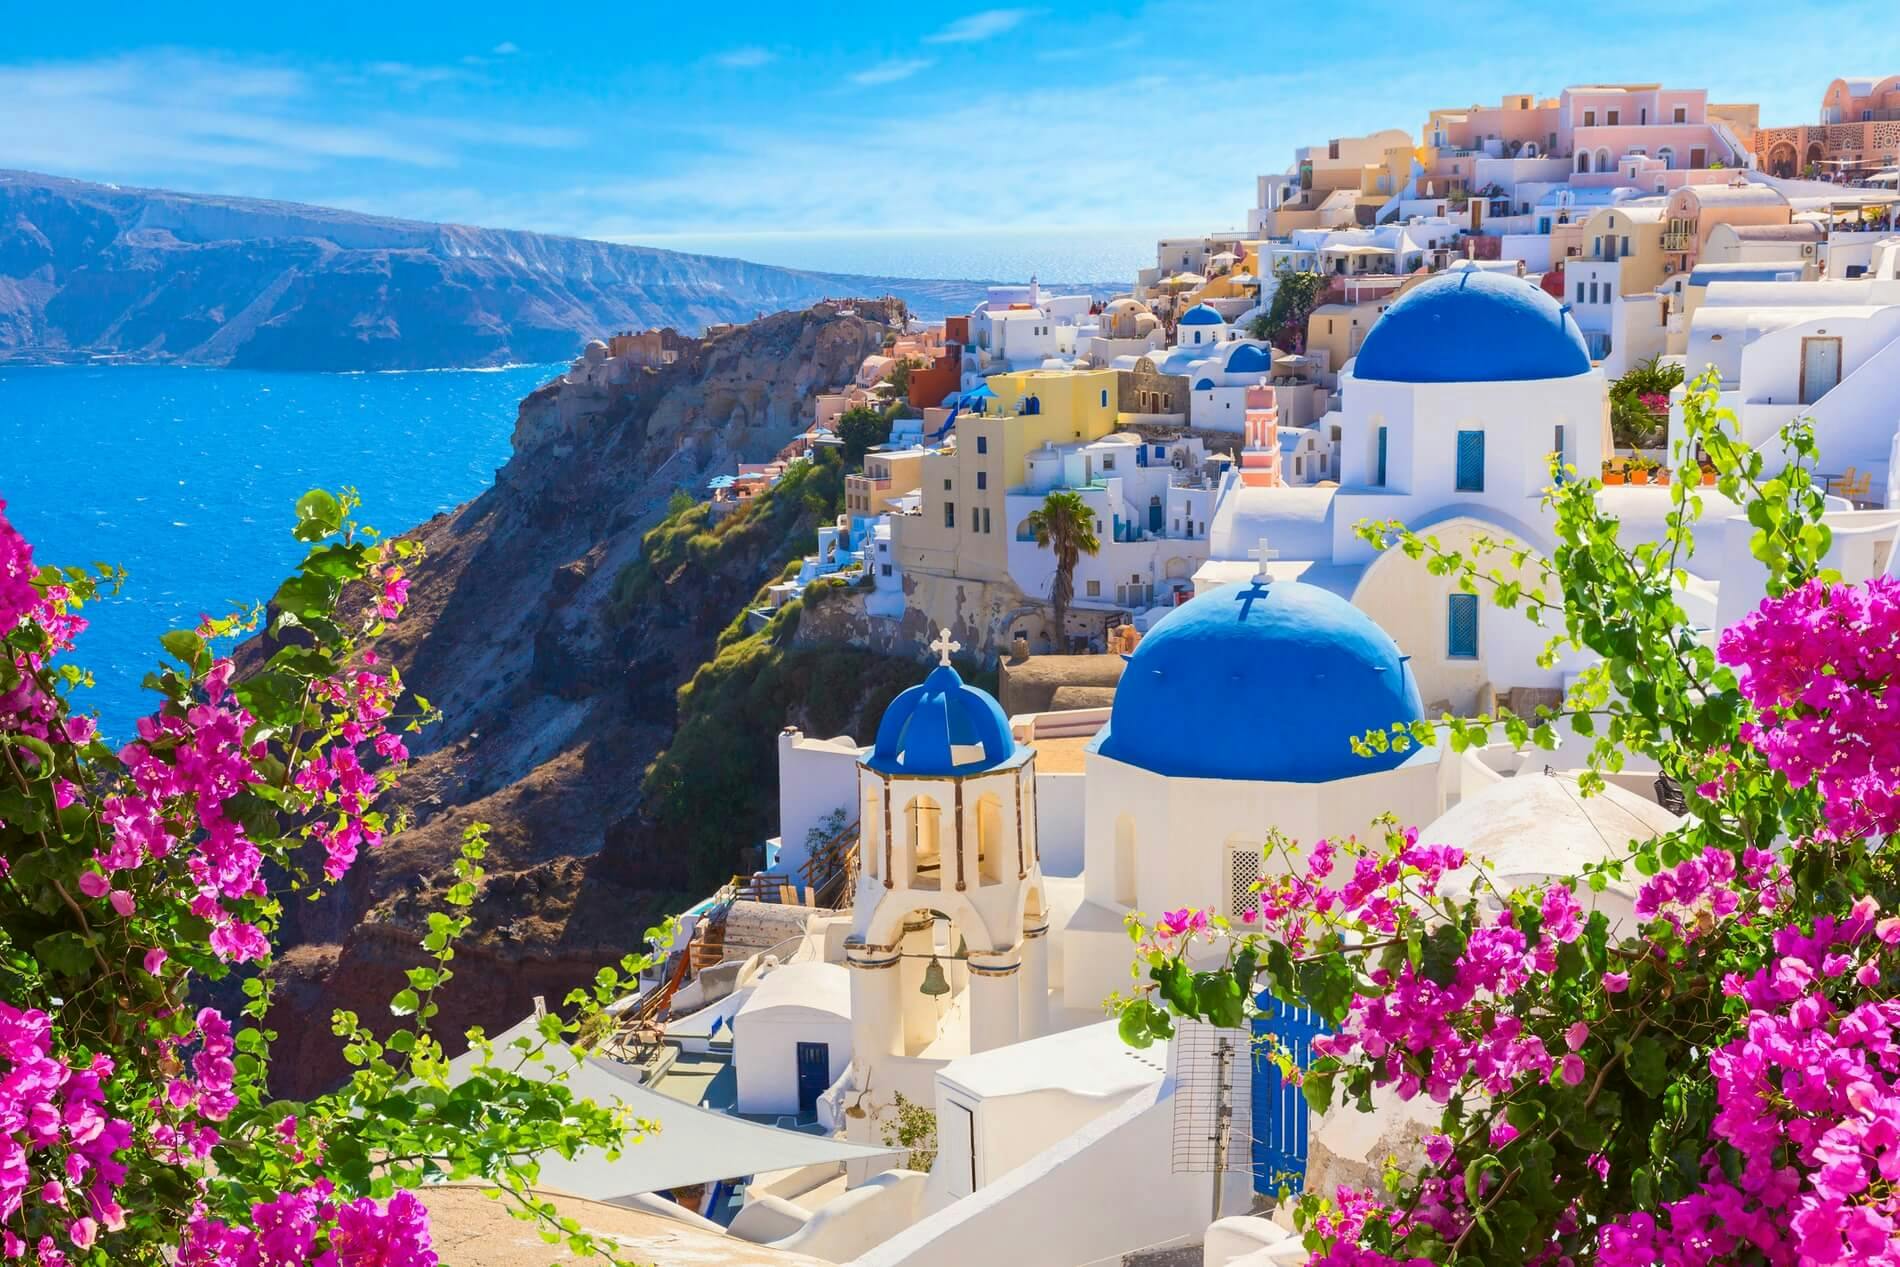 santorini with white walls, blue roofs and pink flowers